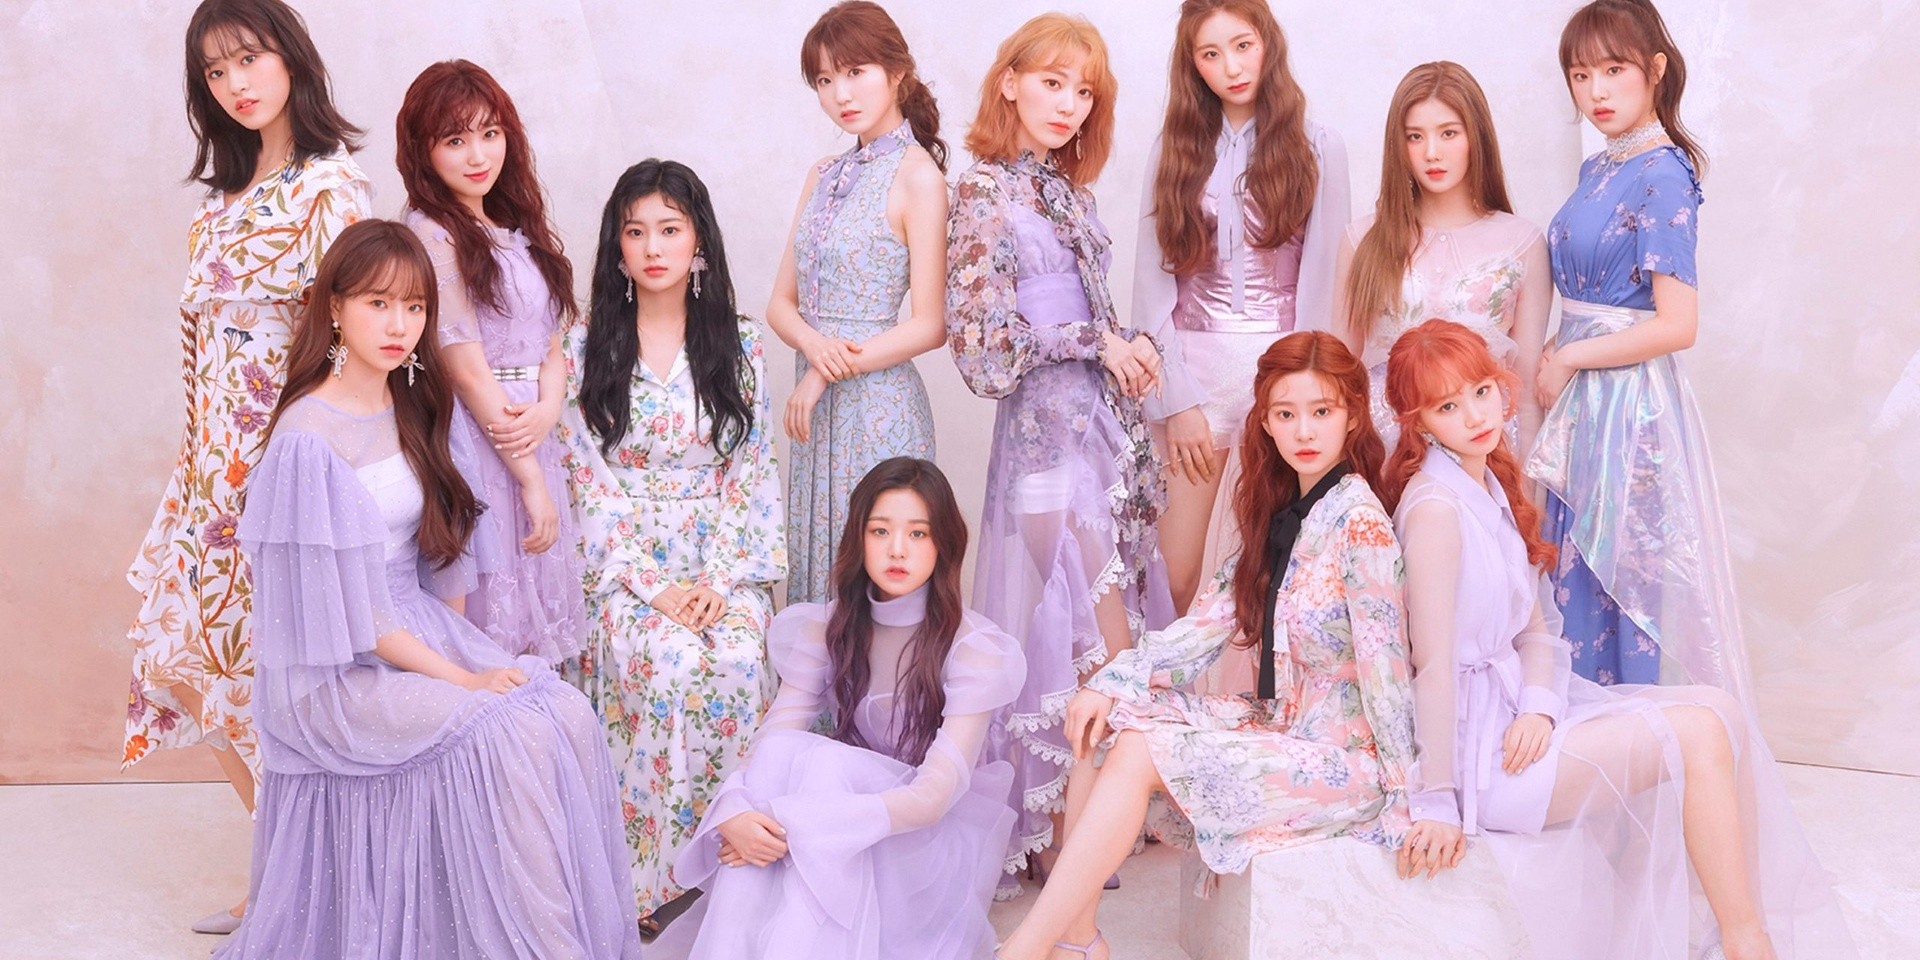 Mnet confirms IZ*ONE to disband this April